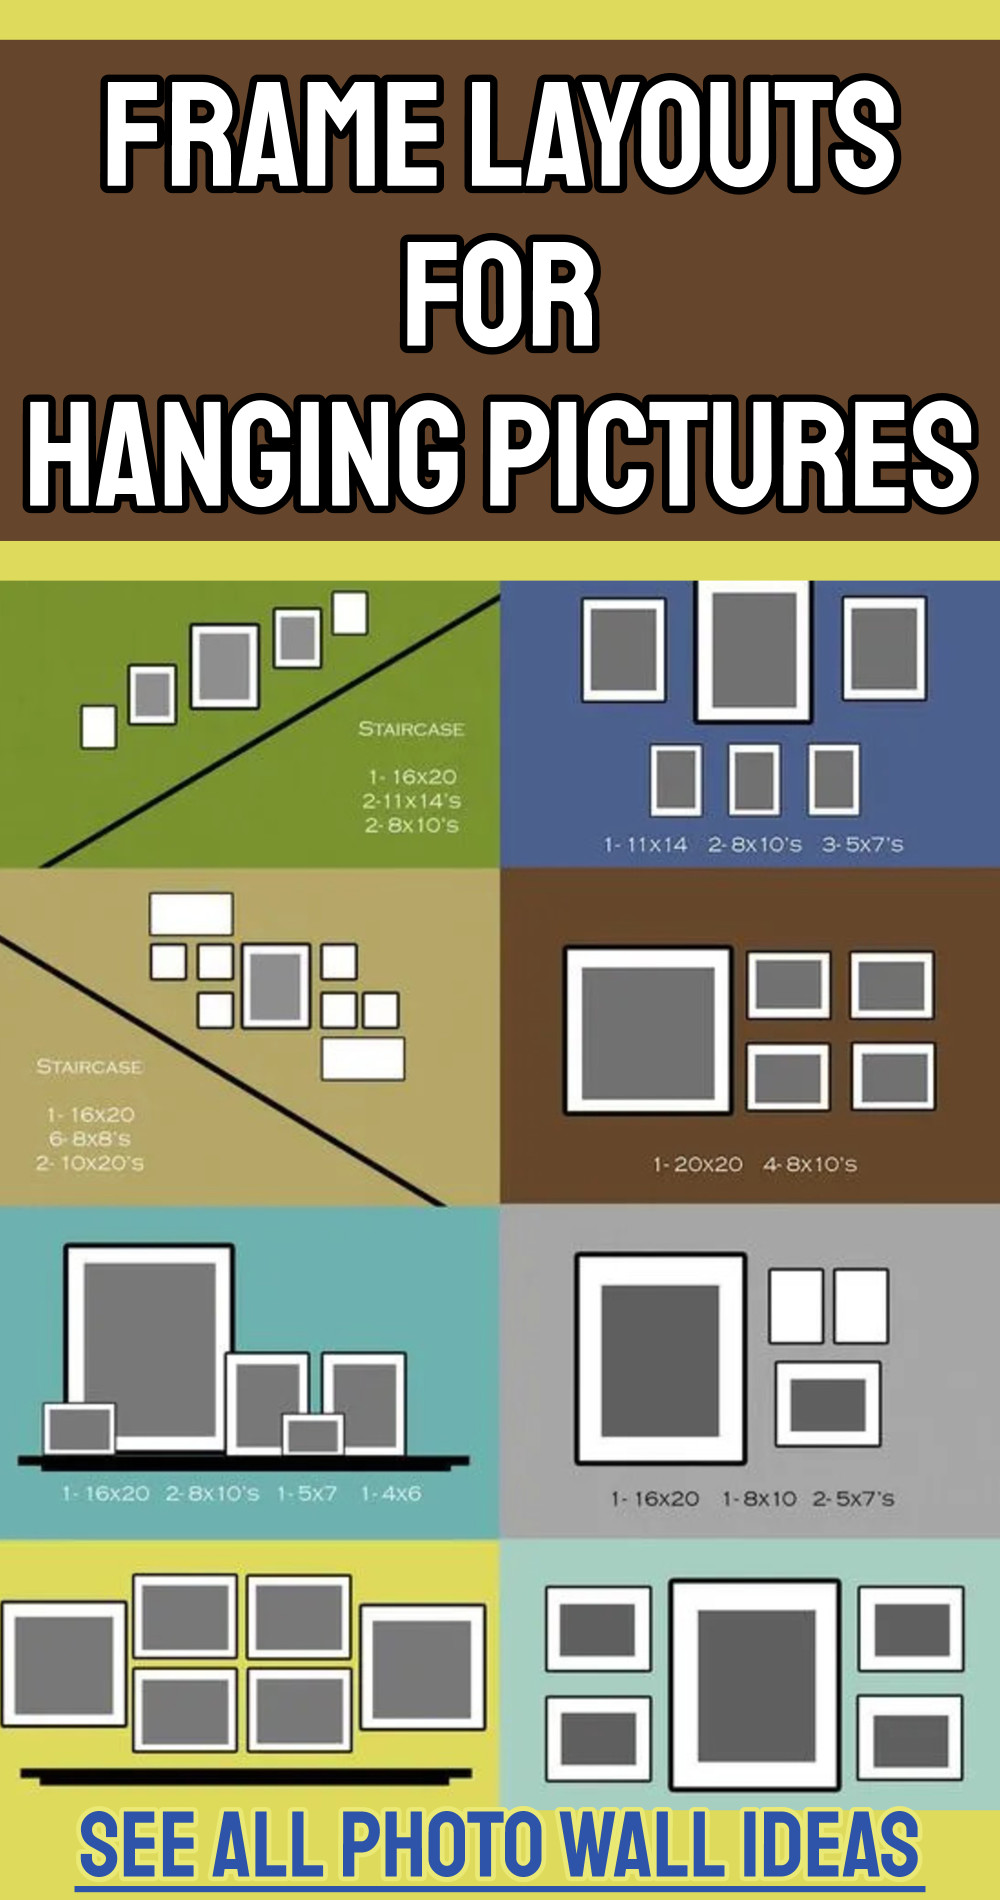 frame layouts and picture arrangements for hanging pictures